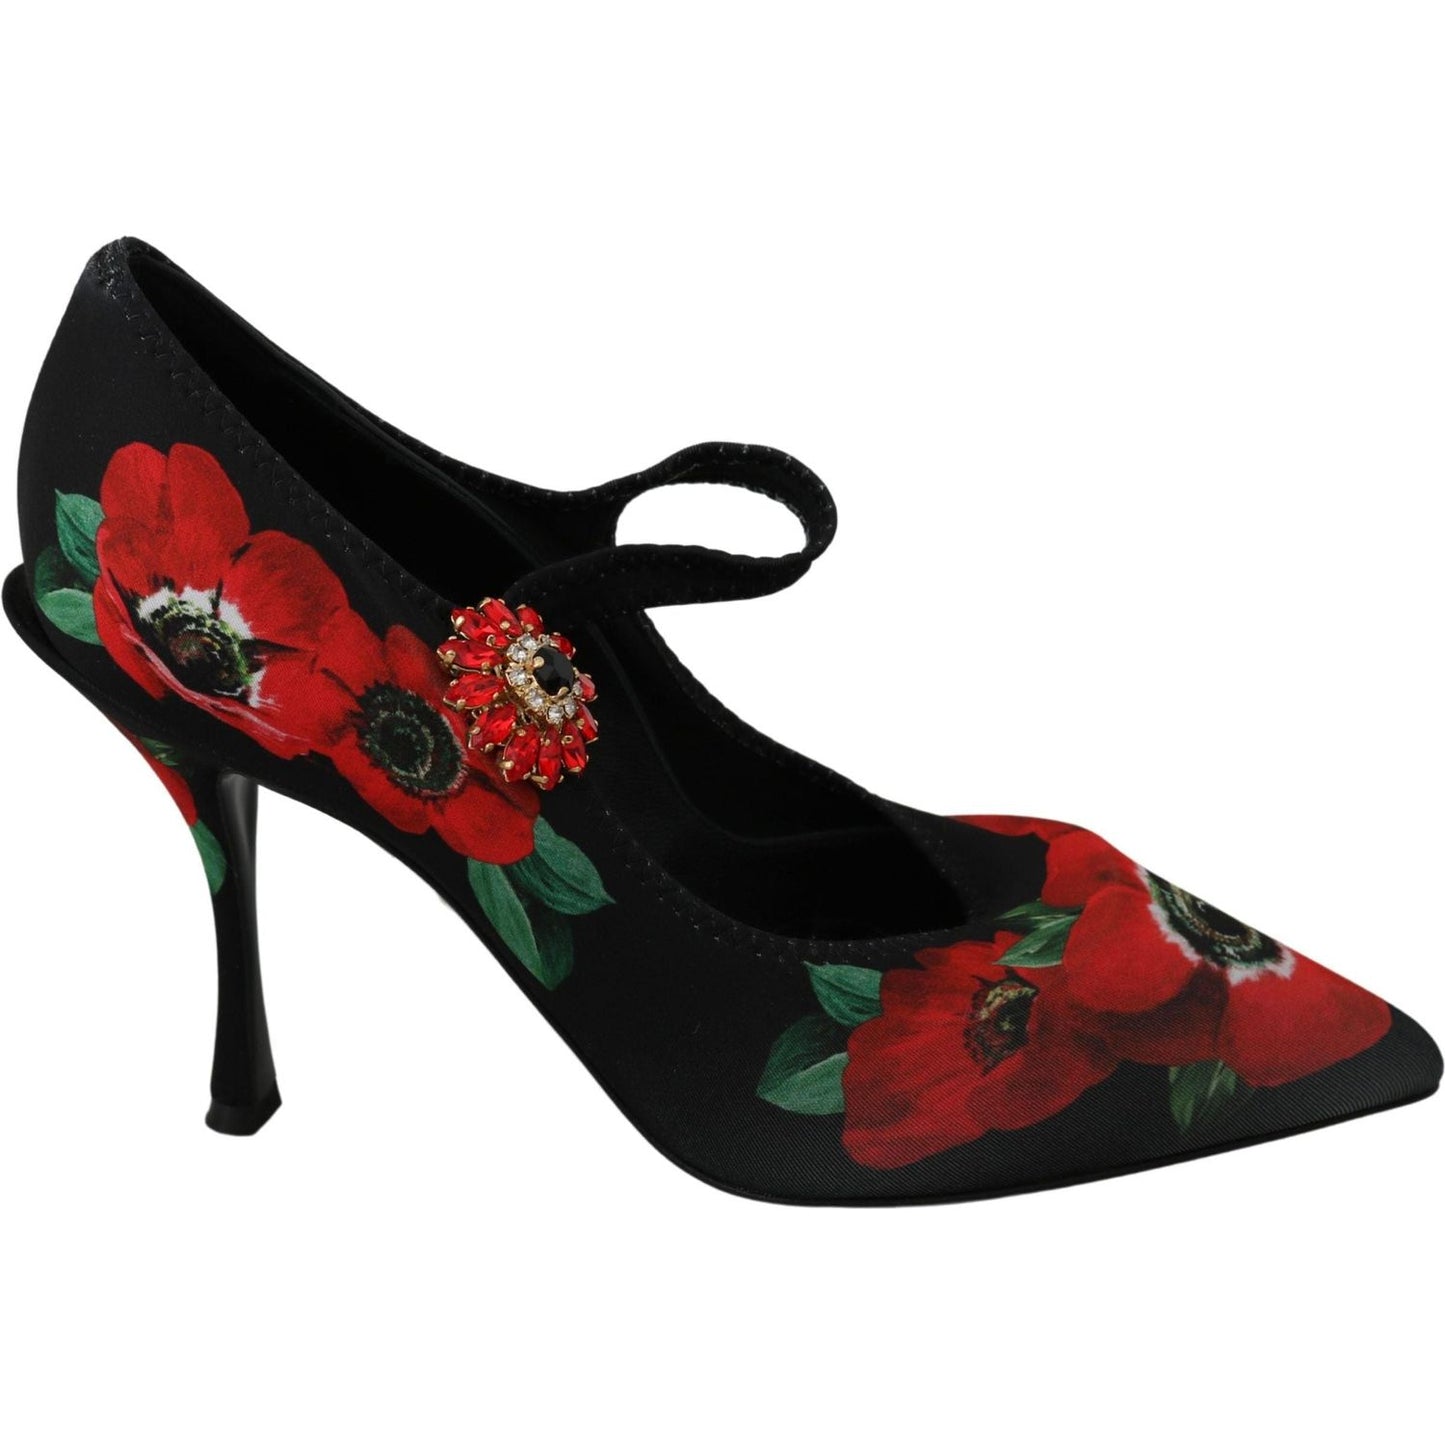 Dolce & Gabbana Floral Mary Janes Pumps with Crystal Detail Shoes black-red-floral-mary-janes-pumps-shoes